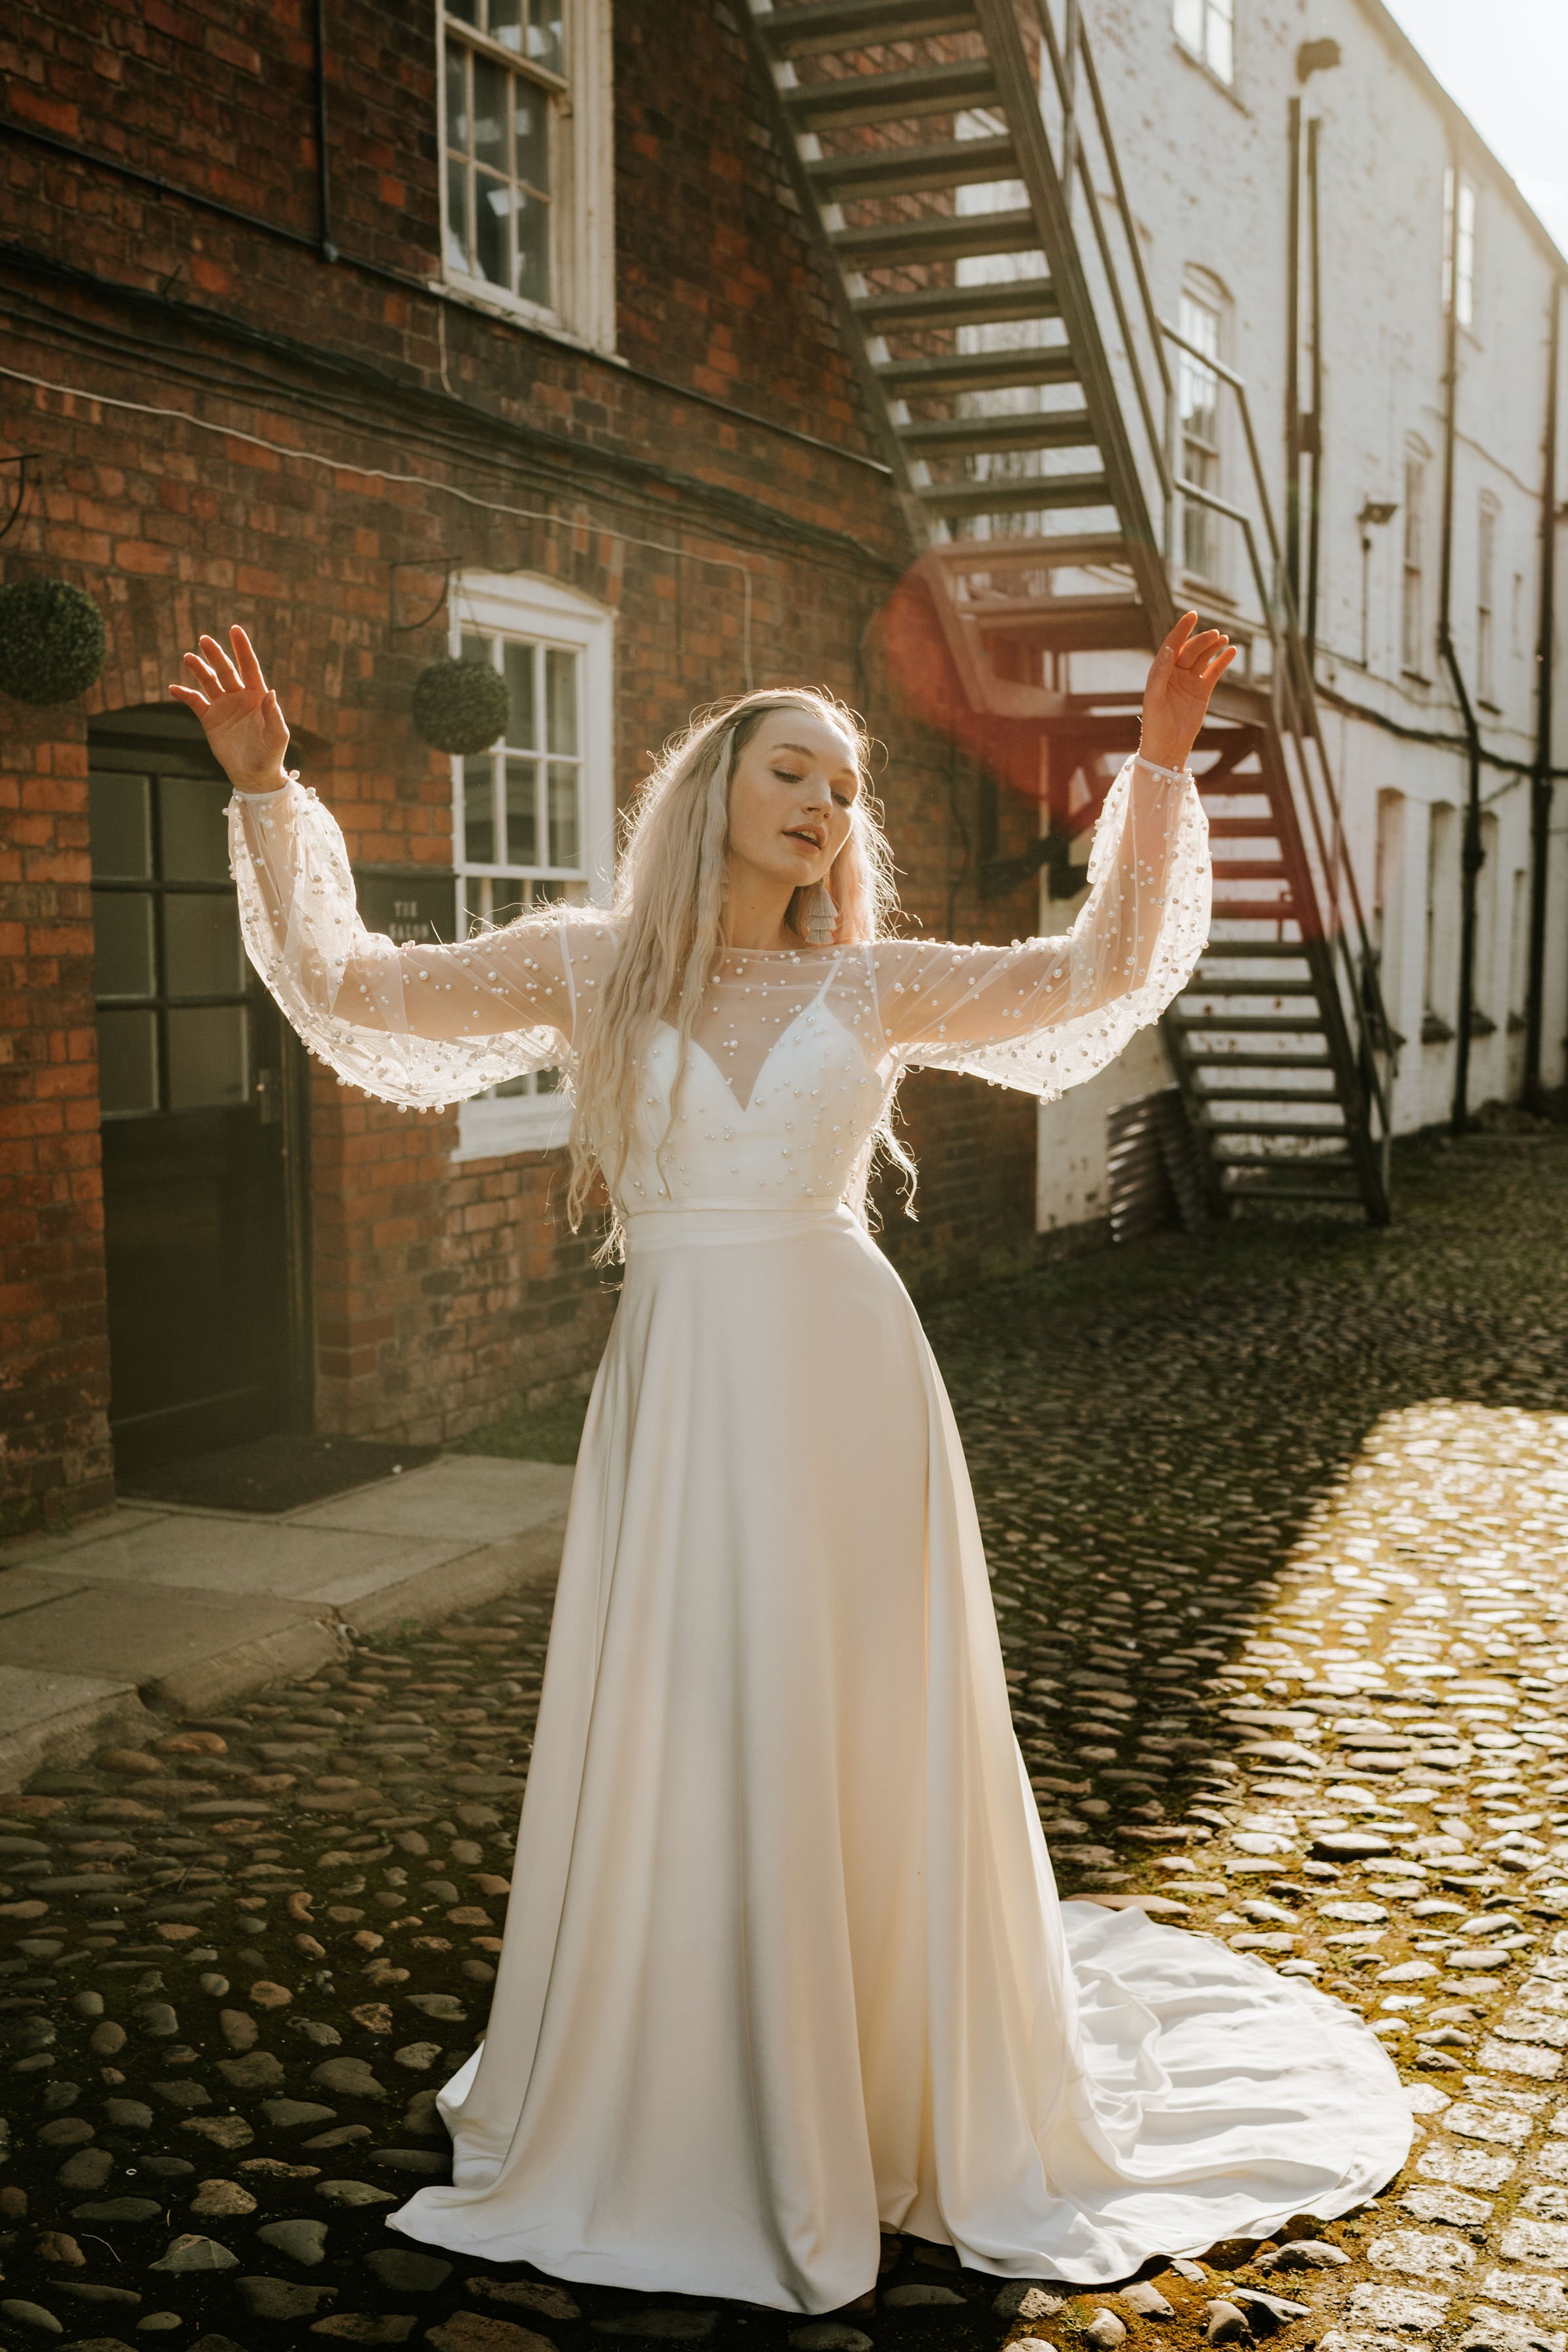 Eco-friendly wedding dress shop in Buckinghamshire | Love and Loved ...